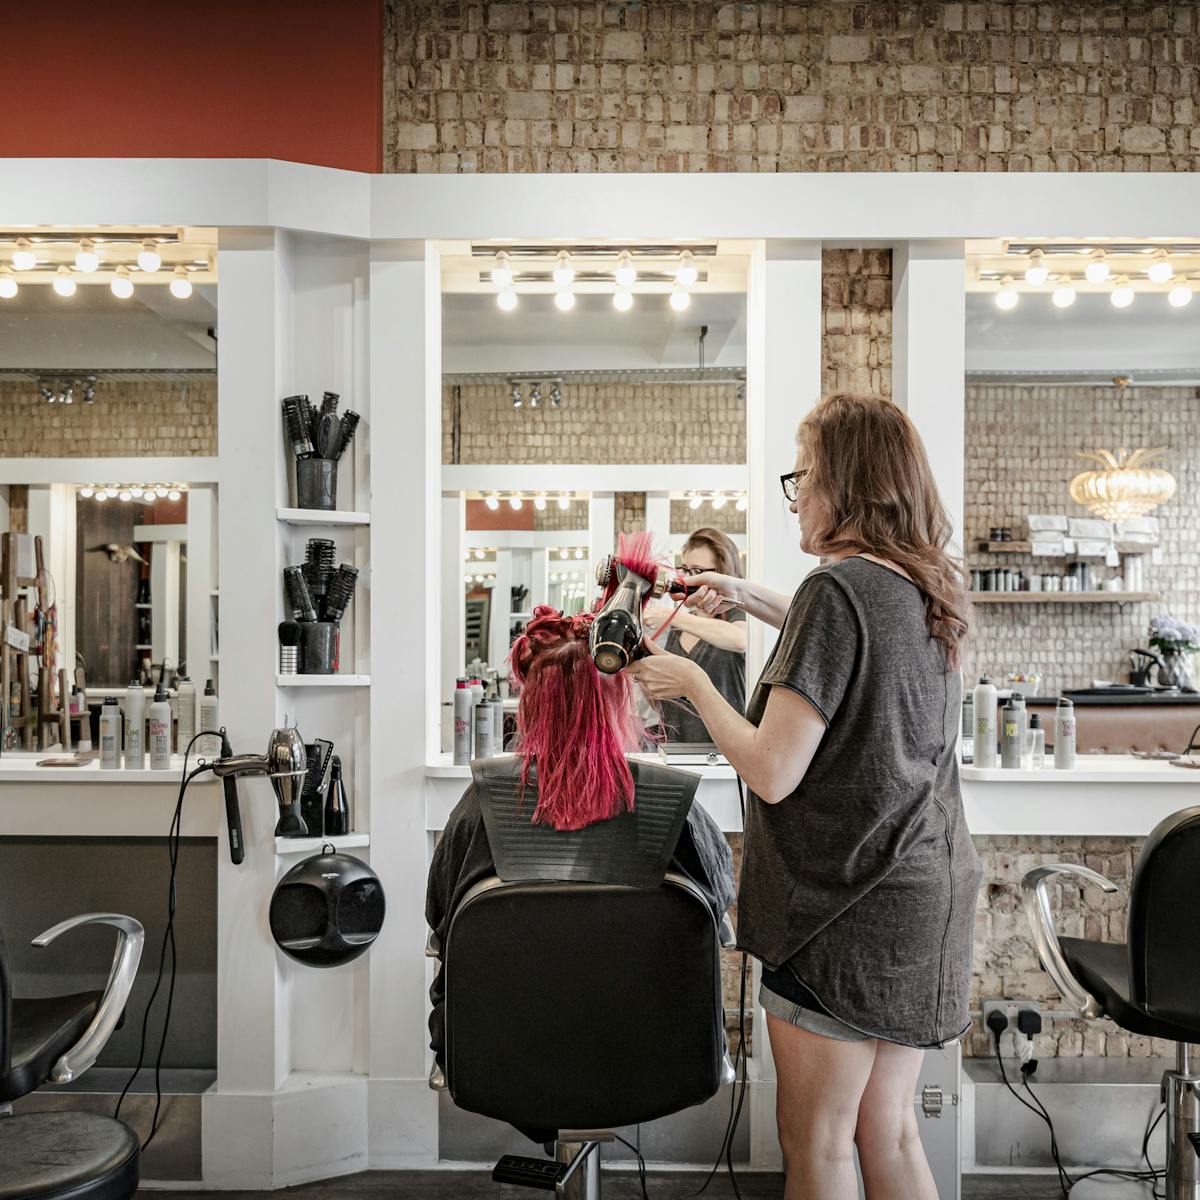 Photograph showing a woman from behind sitting in a hairdressing salon chair, wearing a rubber hairdressing collar. To her right the hairdresser is blow drying her pink hair. In front of her are three mirrors, lit with 4 bare bulbs per mirror. Behind the mirror the walls are made up of bare bricks.